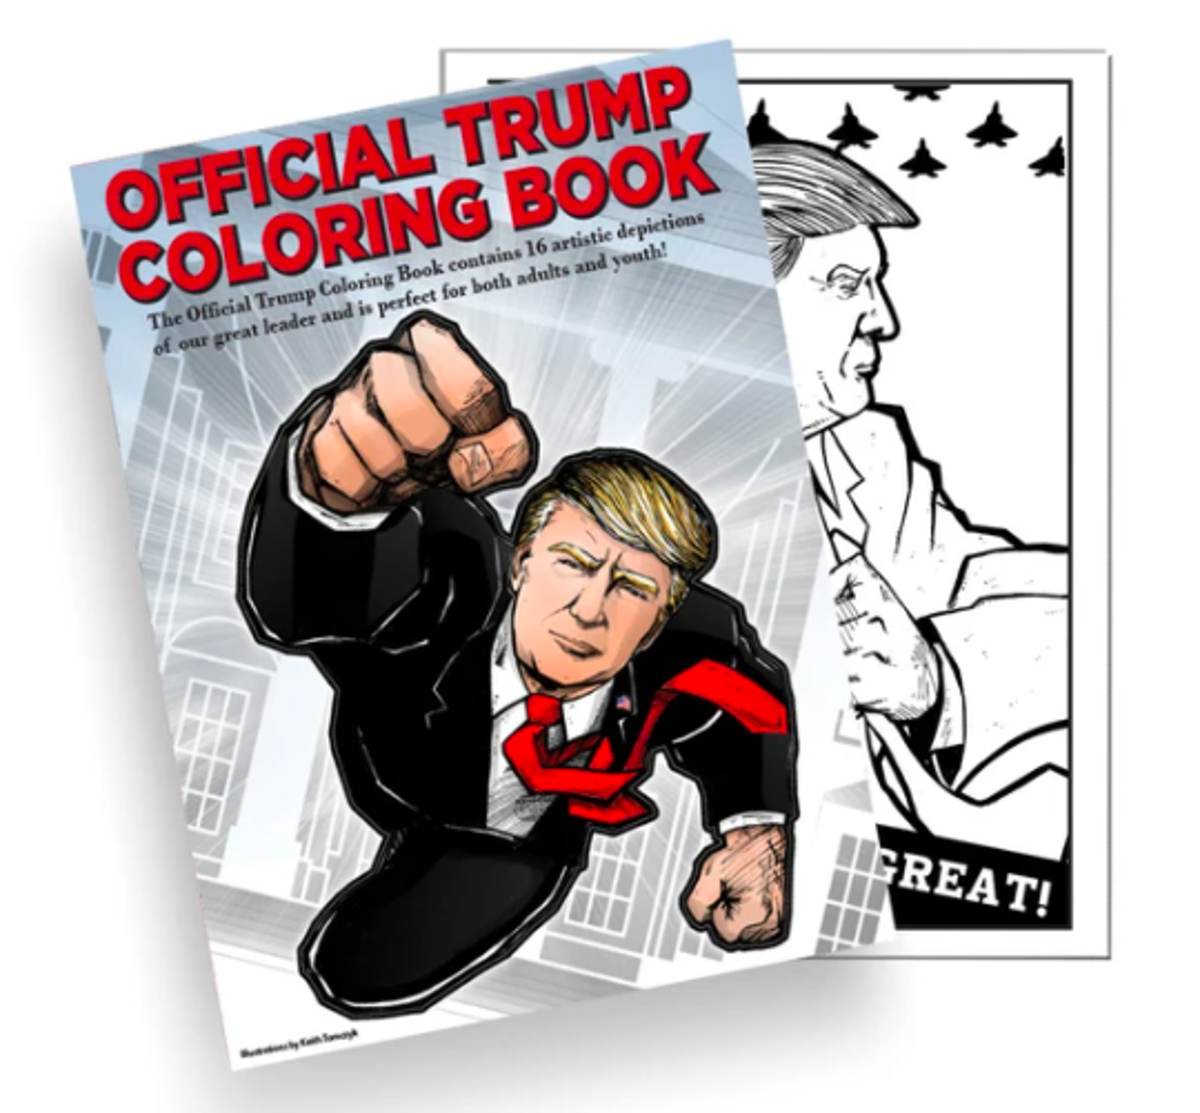 Download Trump Campaign Sends Text To Sell Voters His Colouring Book As Us Coronavirus Deaths Pass 90 000 The Independent The Independent